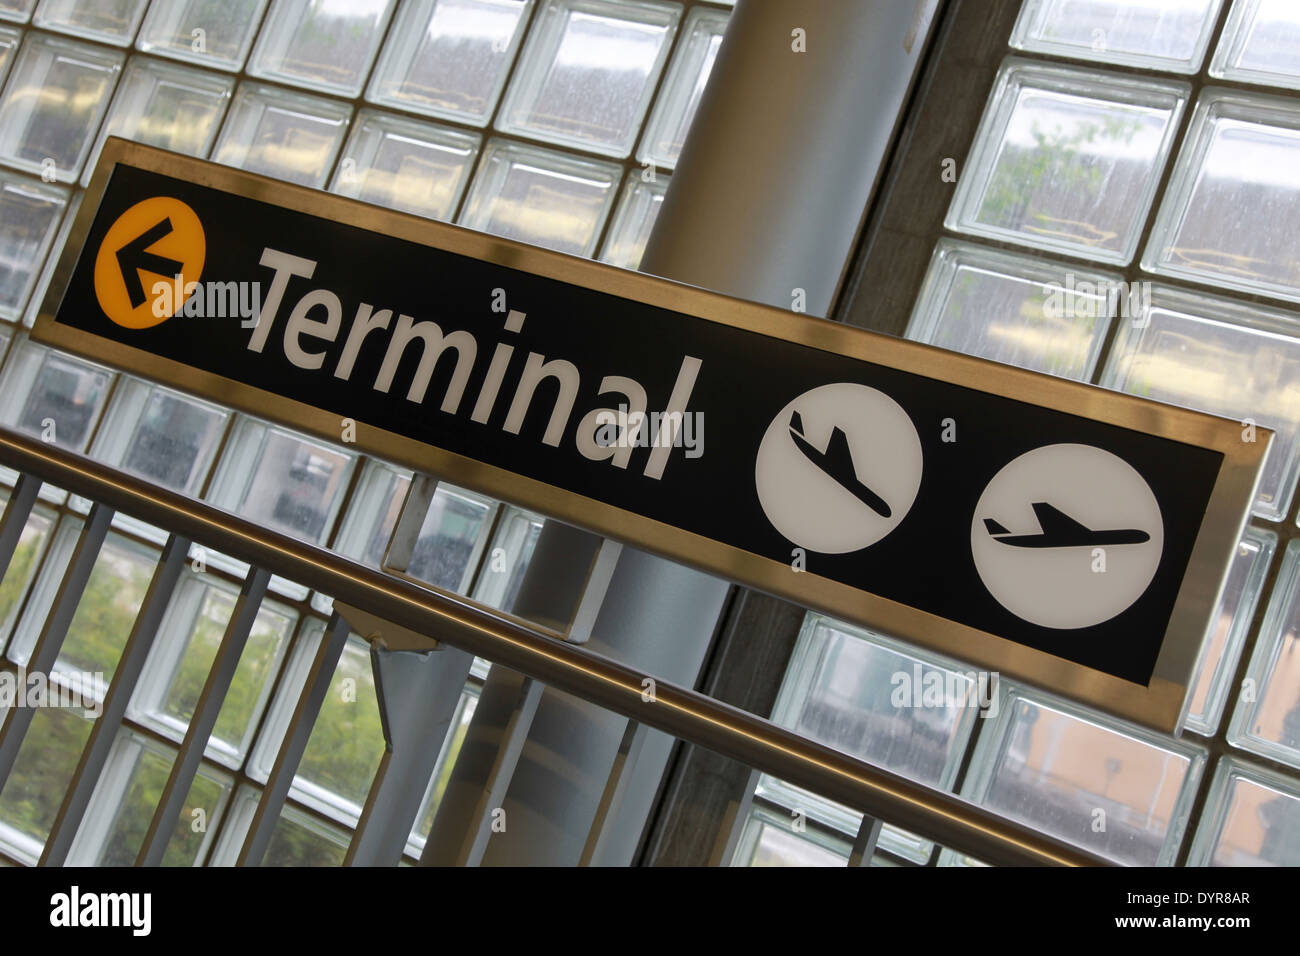 Sign showing the way to the terminal building at an airport Stock Photo